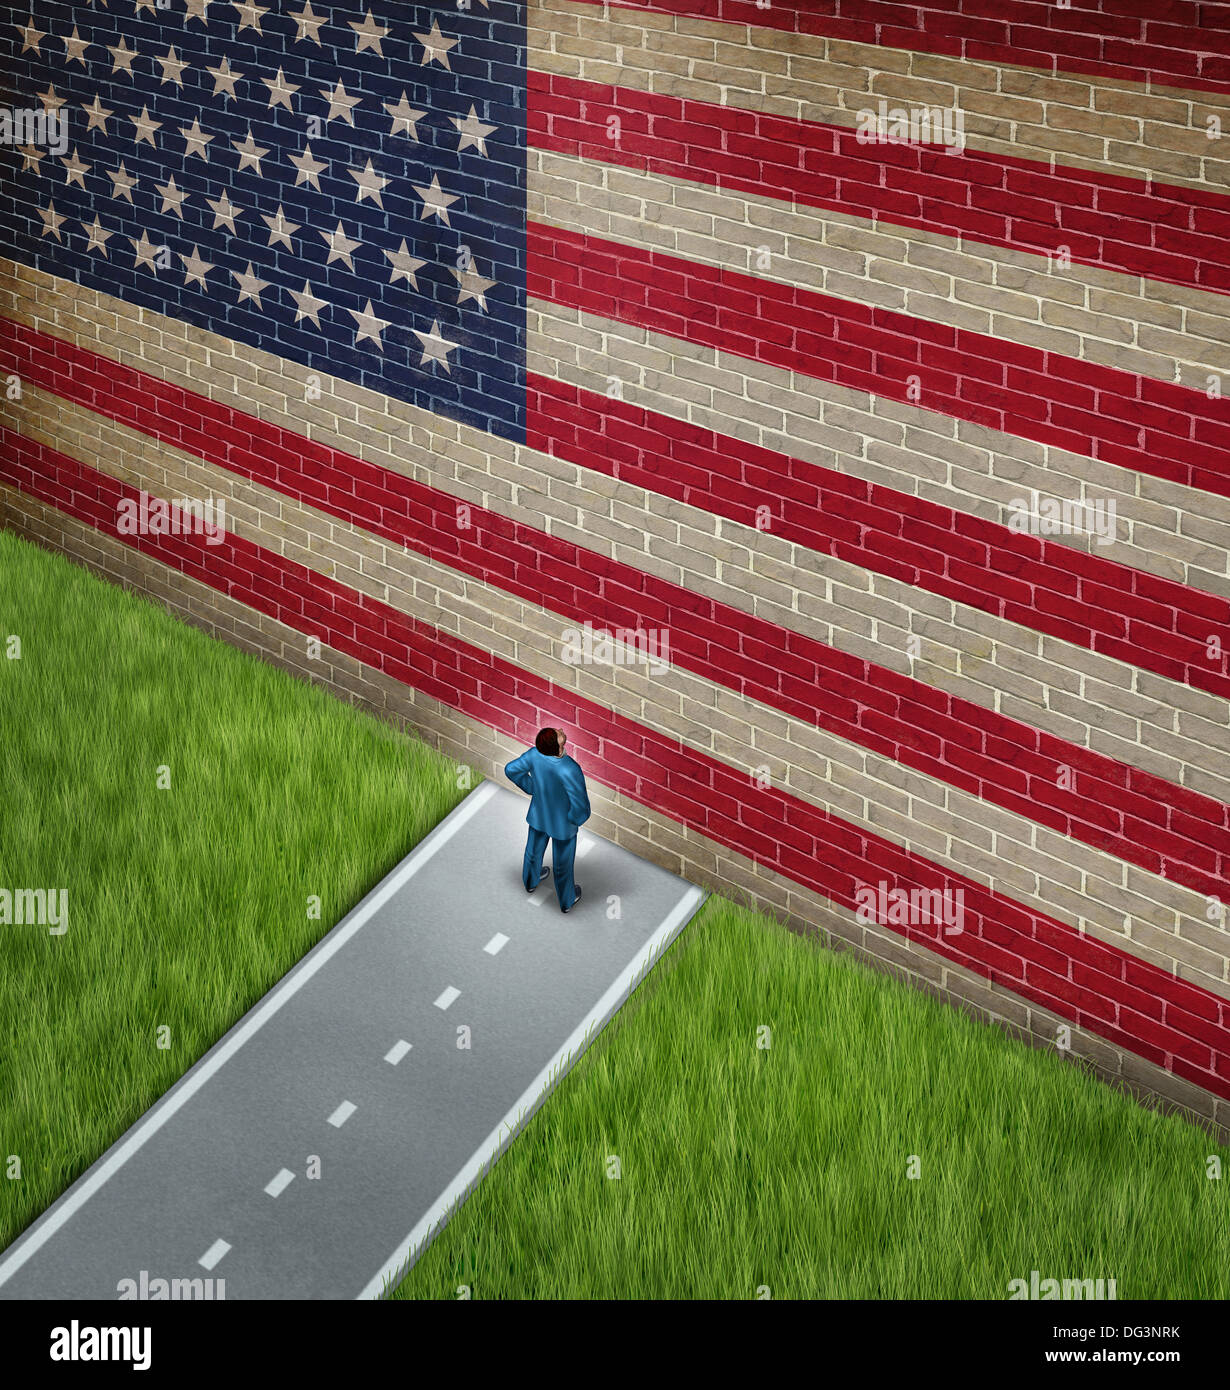 Closed America and United States government shutdown concept as a metaphor for US closure or strict immigration policy as a businessman on a road blocked by giant brick wall with a painted flag blocking entrance as a trade or business barrier. Stock Photo